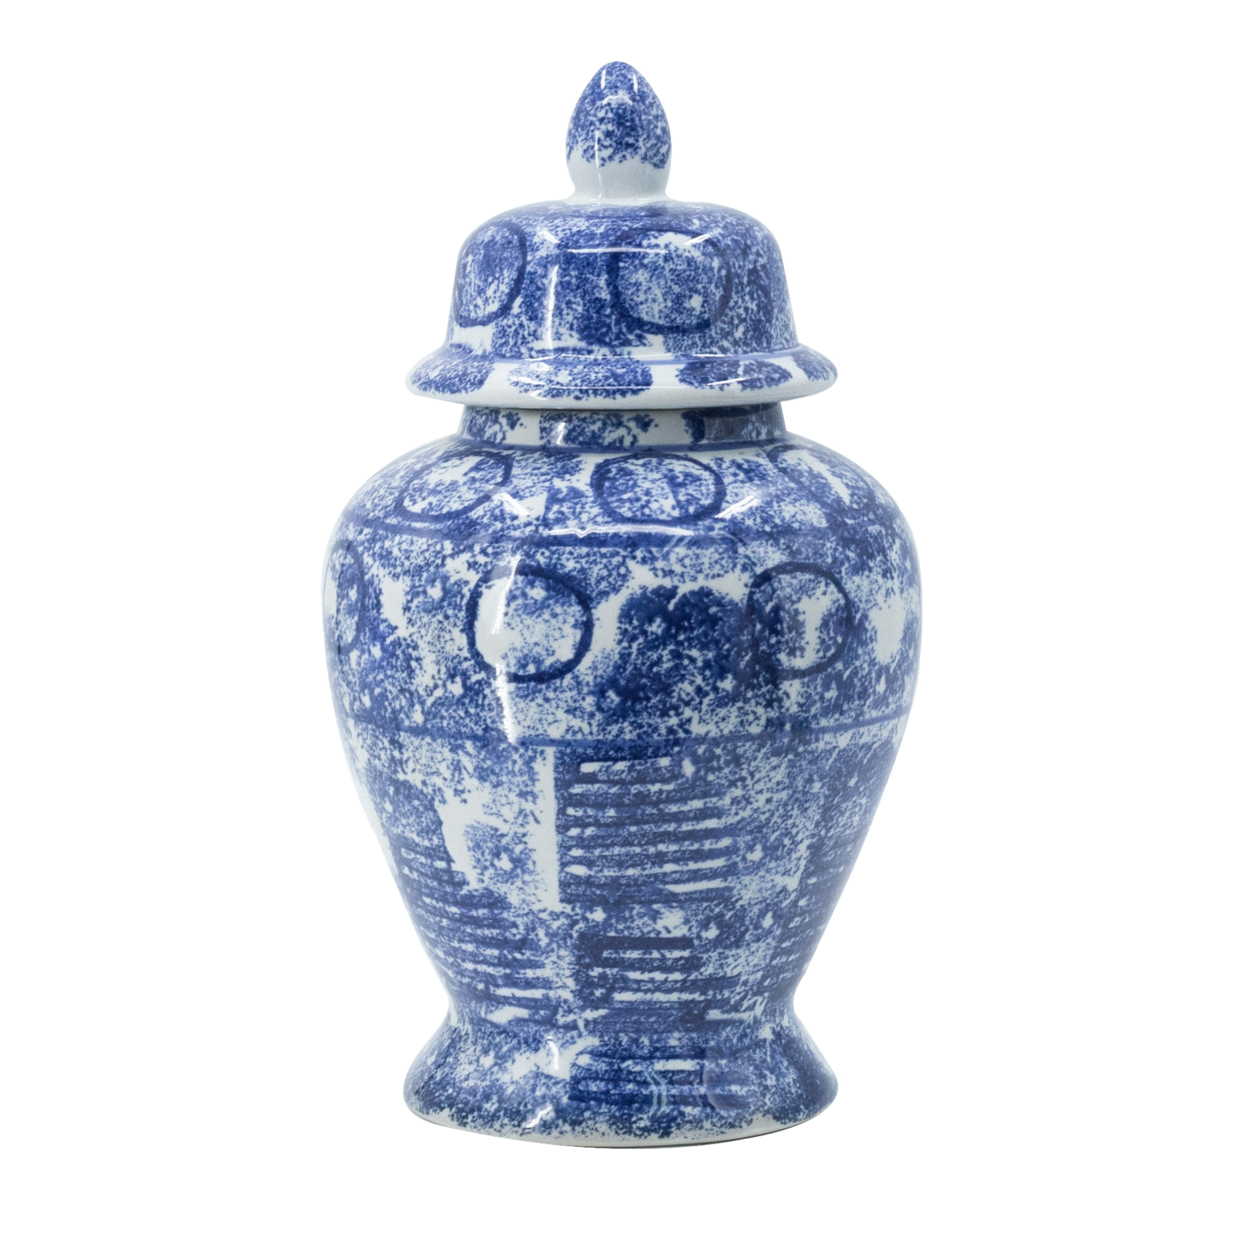 17 Inch Tall Ginger Jar, Abstract Design Over Blue And White Porcelain- Saltoro Sherpi